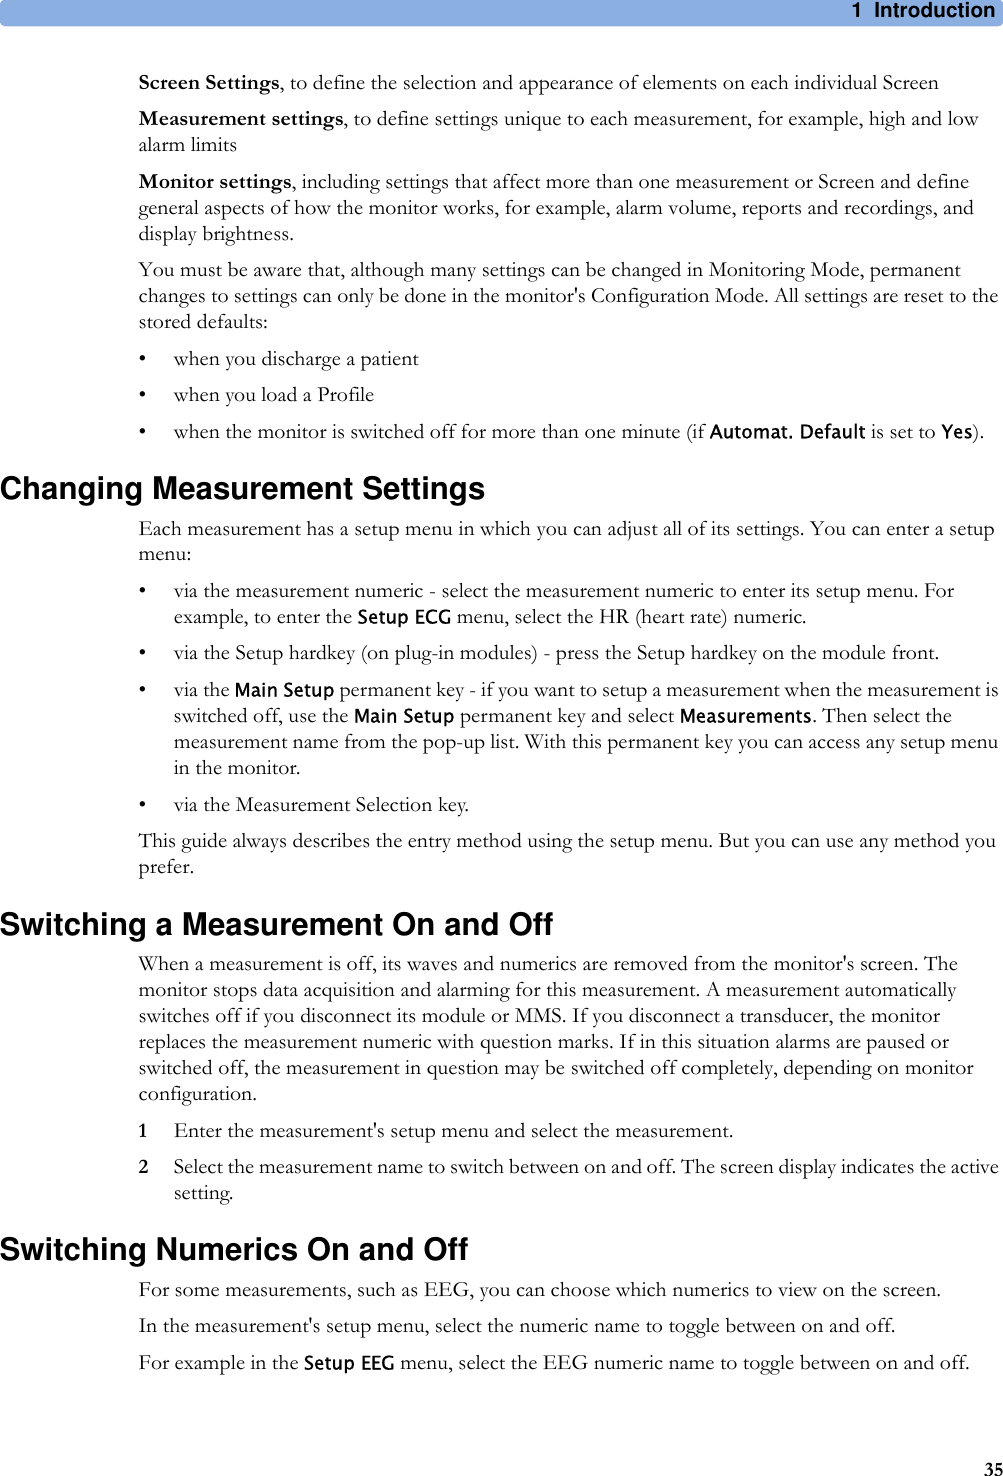 1 Introduction35Screen Settings, to define the selection and appearance of elements on each individual ScreenMeasurement settings, to define settings unique to each measurement, for example, high and low alarm limitsMonitor settings, including settings that affect more than one measurement or Screen and define general aspects of how the monitor works, for example, alarm volume, reports and recordings, and display brightness.You must be aware that, although many settings can be changed in Monitoring Mode, permanent changes to settings can only be done in the monitor&apos;s Configuration Mode. All settings are reset to the stored defaults:• when you discharge a patient• when you load a Profile• when the monitor is switched off for more than one minute (if Automat. Default is set to Yes).Changing Measurement SettingsEach measurement has a setup menu in which you can adjust all of its settings. You can enter a setup menu:• via the measurement numeric - select the measurement numeric to enter its setup menu. For example, to enter the Setup ECG menu, select the HR (heart rate) numeric.• via the Setup hardkey (on plug-in modules) - press the Setup hardkey on the module front.•via the Main Setup permanent key - if you want to setup a measurement when the measurement is switched off, use the Main Setup permanent key and select Measurements. Then select the measurement name from the pop-up list. With this permanent key you can access any setup menu in the monitor.• via the Measurement Selection key.This guide always describes the entry method using the setup menu. But you can use any method you prefer.Switching a Measurement On and OffWhen a measurement is off, its waves and numerics are removed from the monitor&apos;s screen. The monitor stops data acquisition and alarming for this measurement. A measurement automatically switches off if you disconnect its module or MMS. If you disconnect a transducer, the monitor replaces the measurement numeric with question marks. If in this situation alarms are paused or switched off, the measurement in question may be switched off completely, depending on monitor configuration.1Enter the measurement&apos;s setup menu and select the measurement.2Select the measurement name to switch between on and off. The screen display indicates the active setting.Switching Numerics On and OffFor some measurements, such as EEG, you can choose which numerics to view on the screen.In the measurement&apos;s setup menu, select the numeric name to toggle between on and off.For example in the Setup EEG menu, select the EEG numeric name to toggle between on and off.